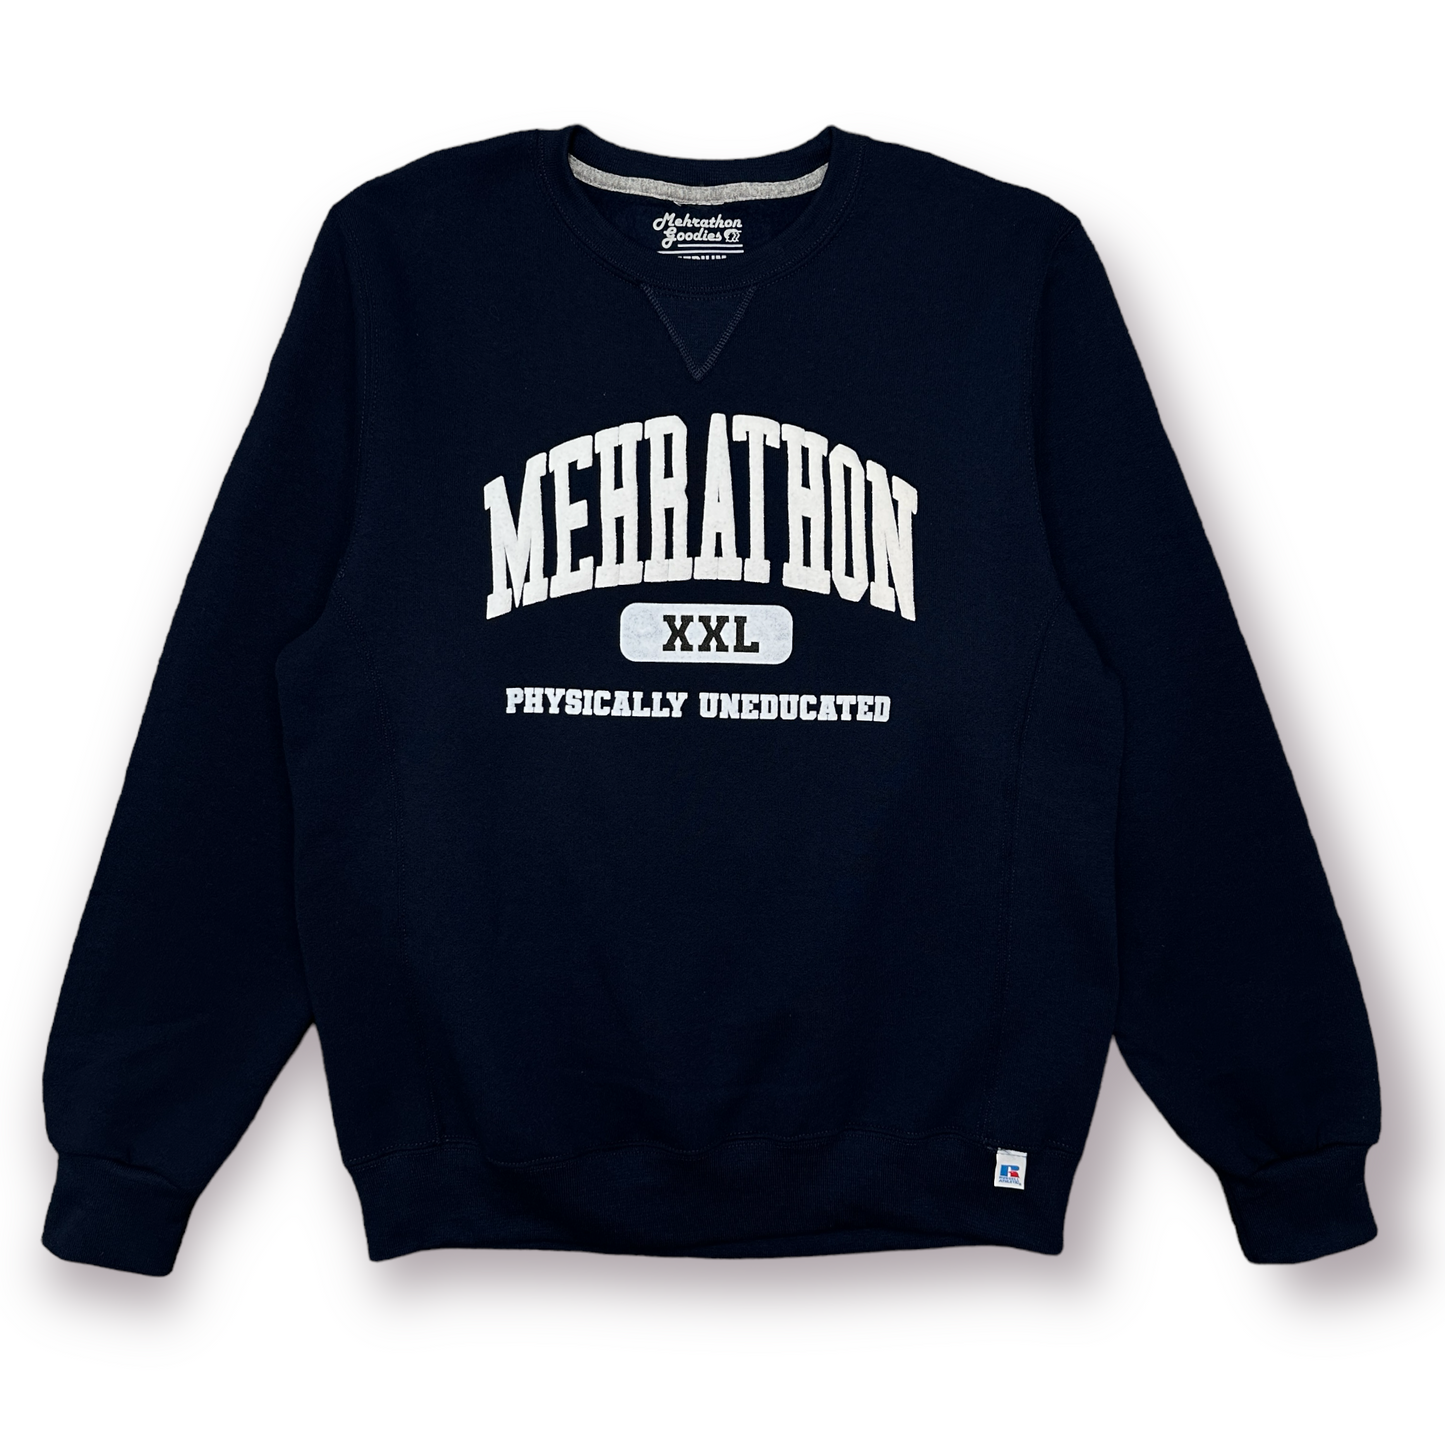 PHYSICALLY UNEDUCATED CREWNECK NAVY